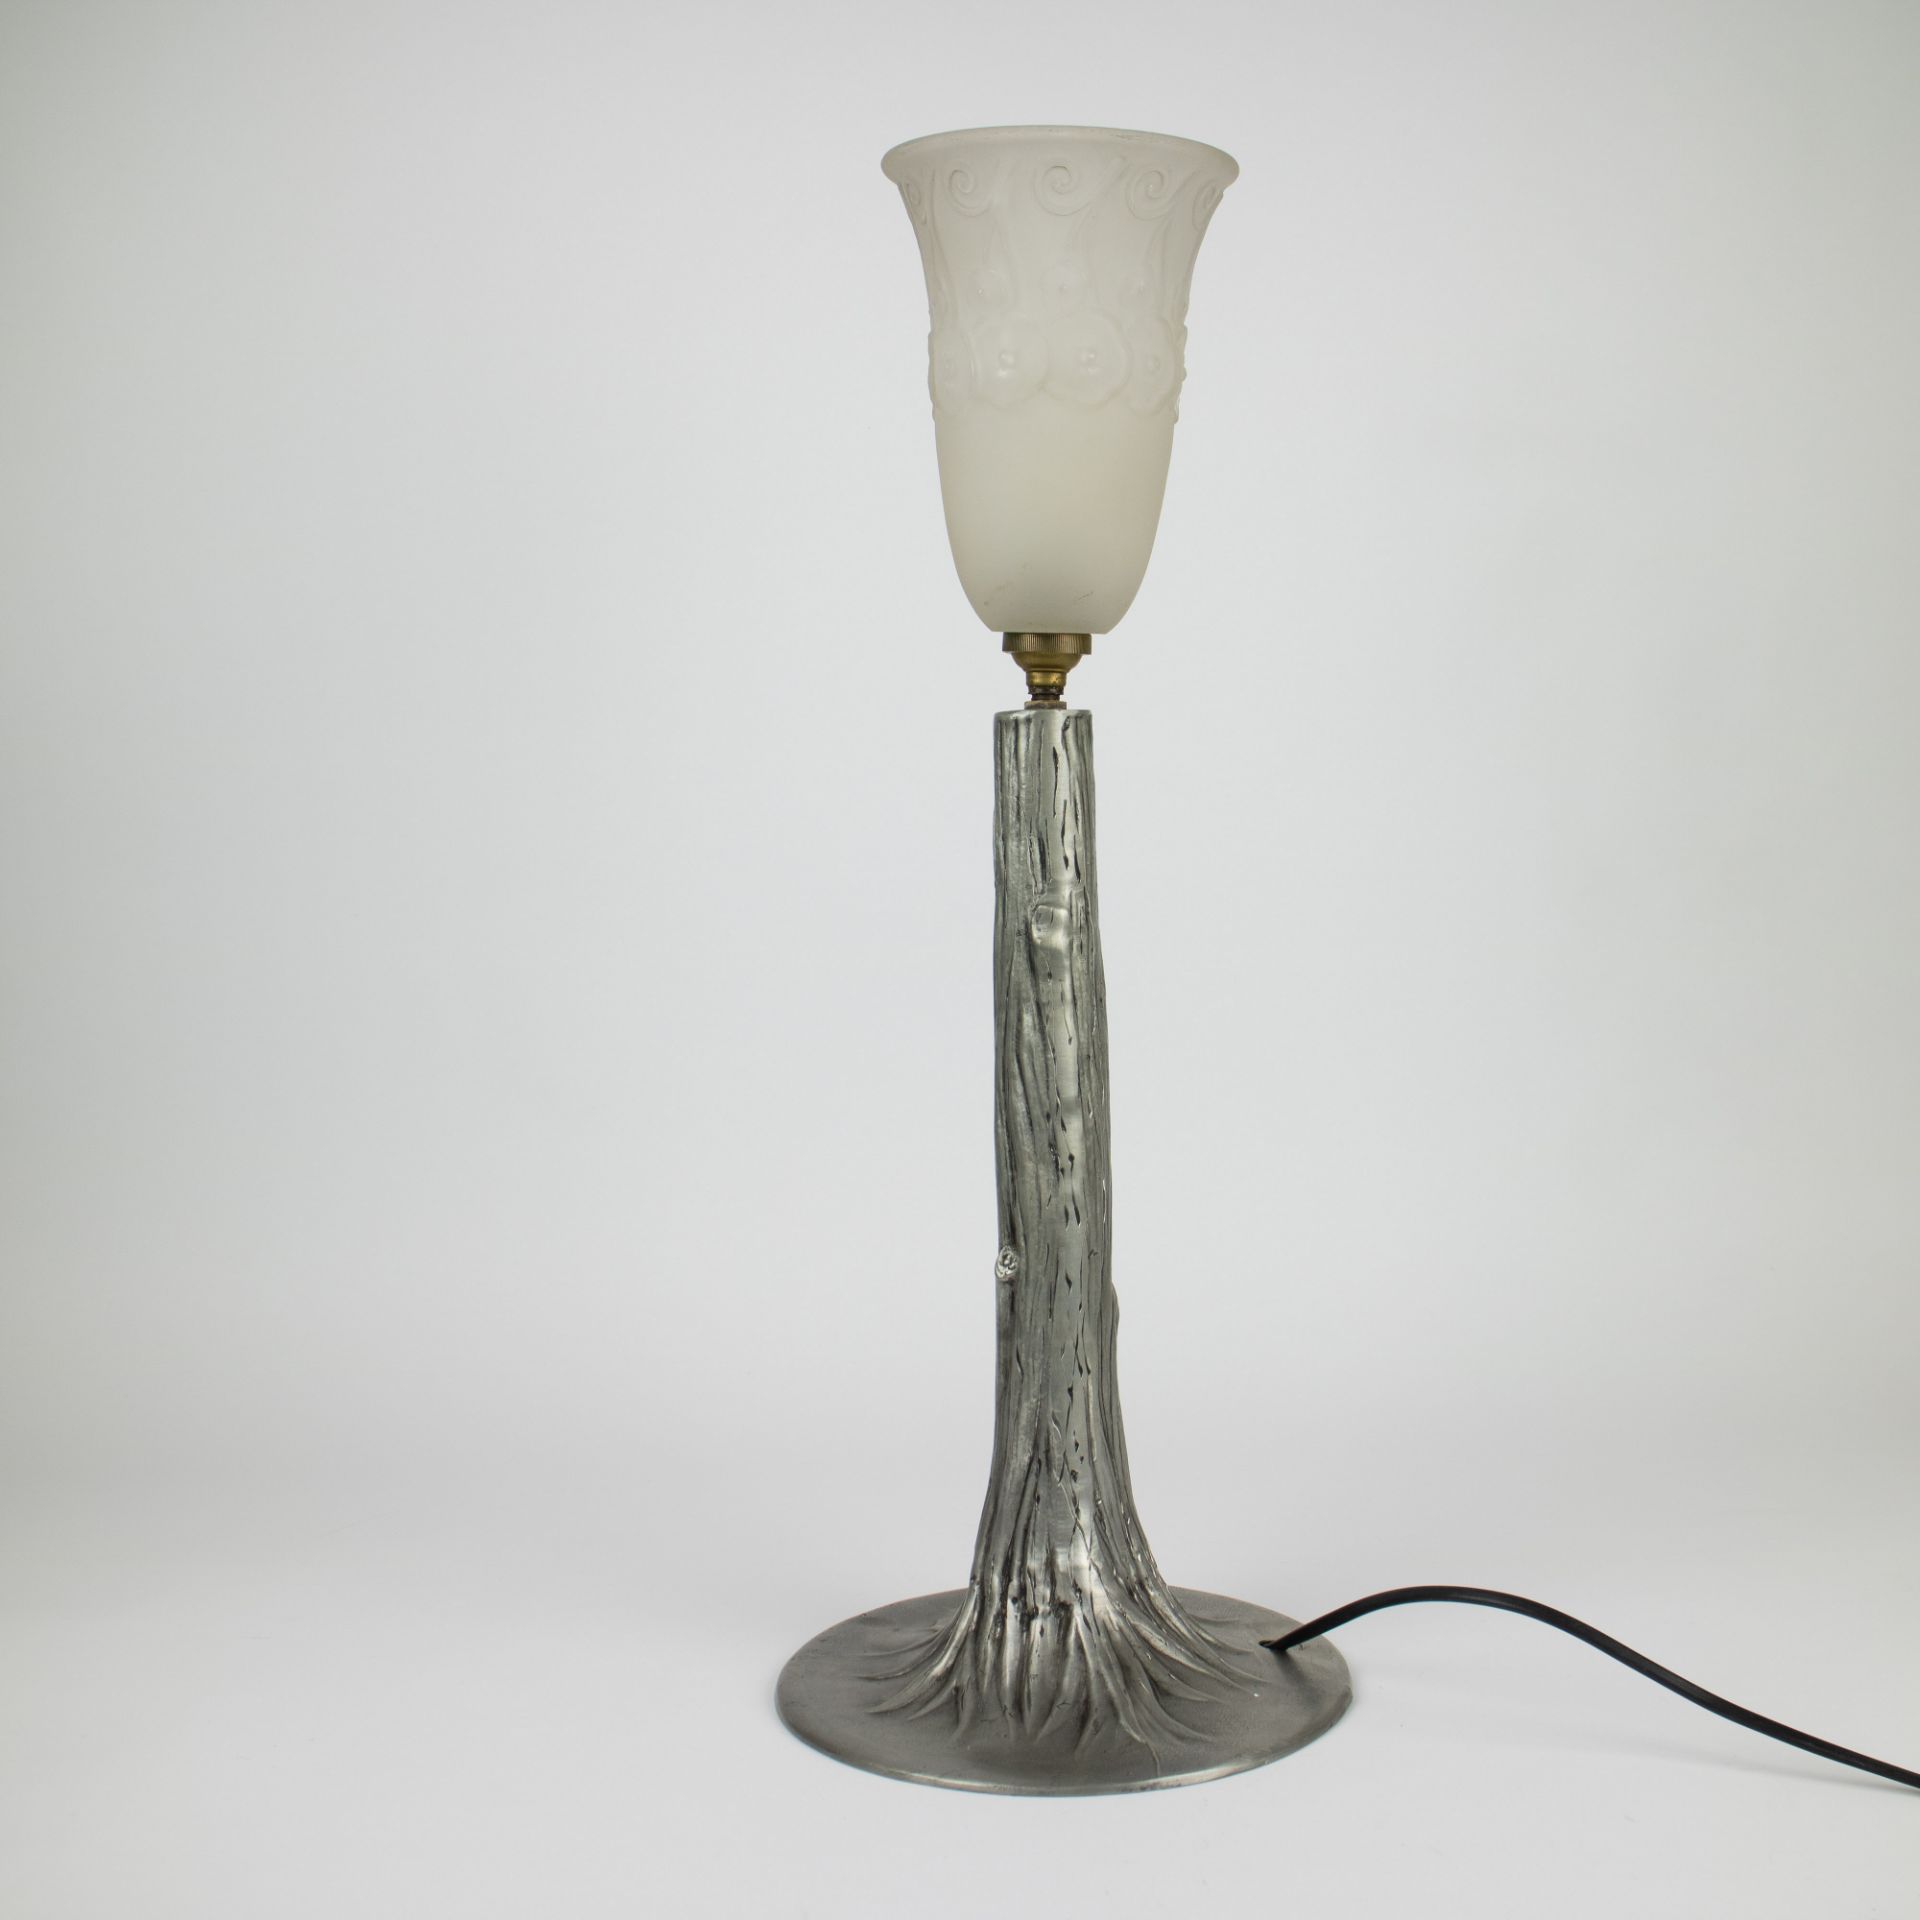 Muller Frères table lamp in silver plated bronze - Image 4 of 4